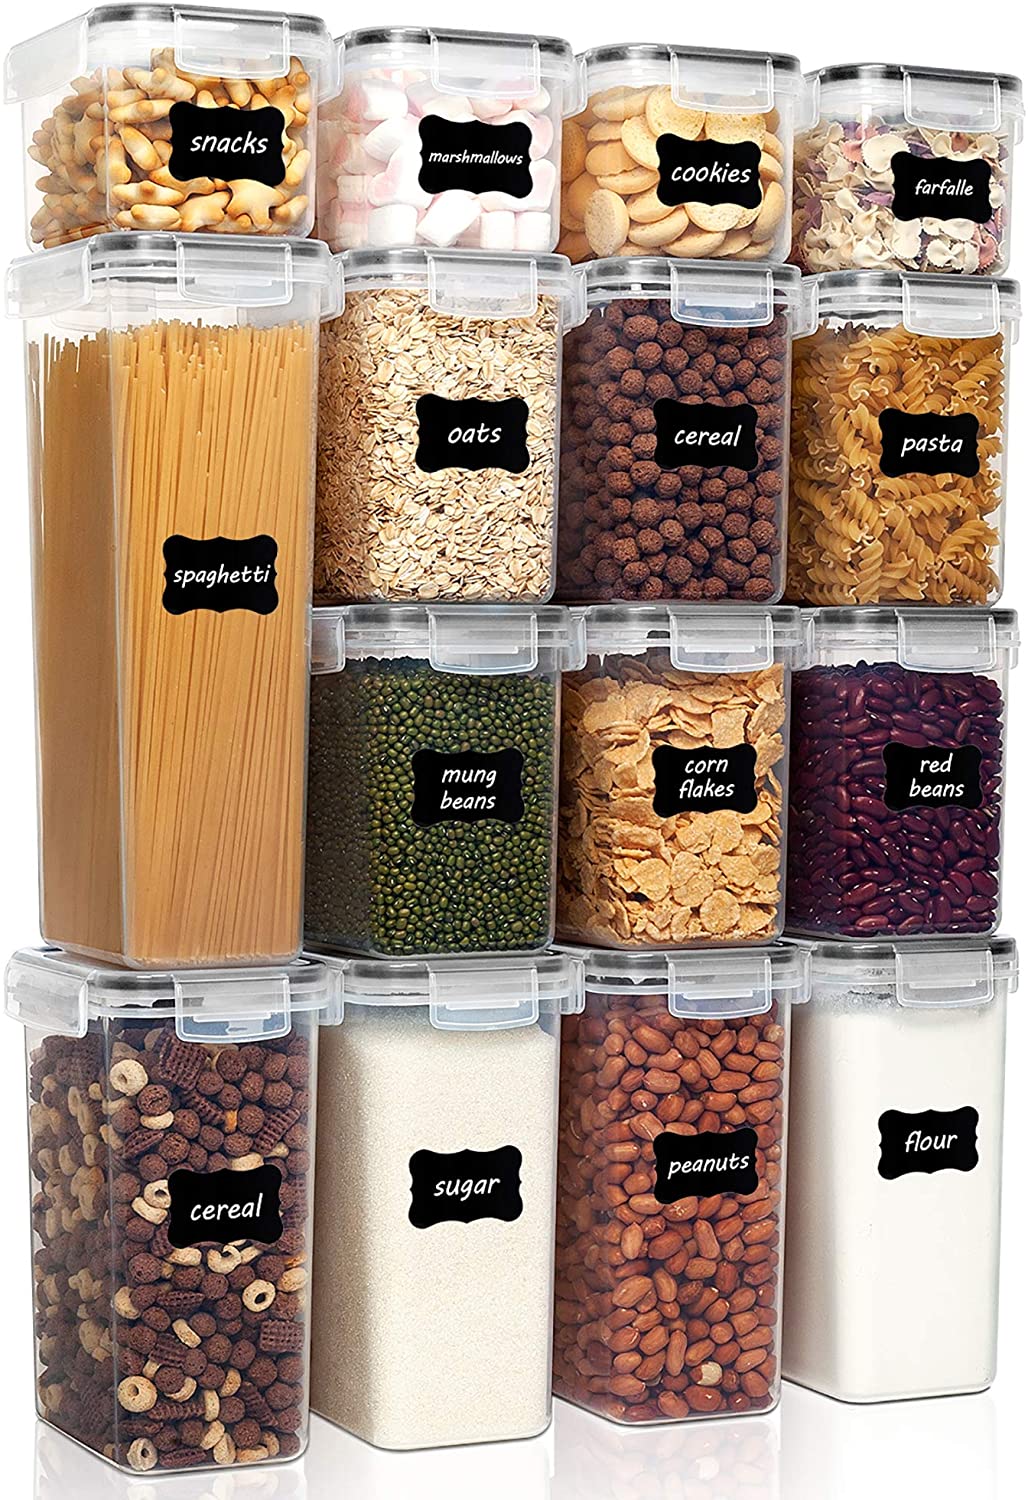 https://lvglomark.com/wp-content/uploads/2021/11/AIRTIGHT-FOOD-STORAGE-CONTAINERS-SET-WITH-LIDS.jpg